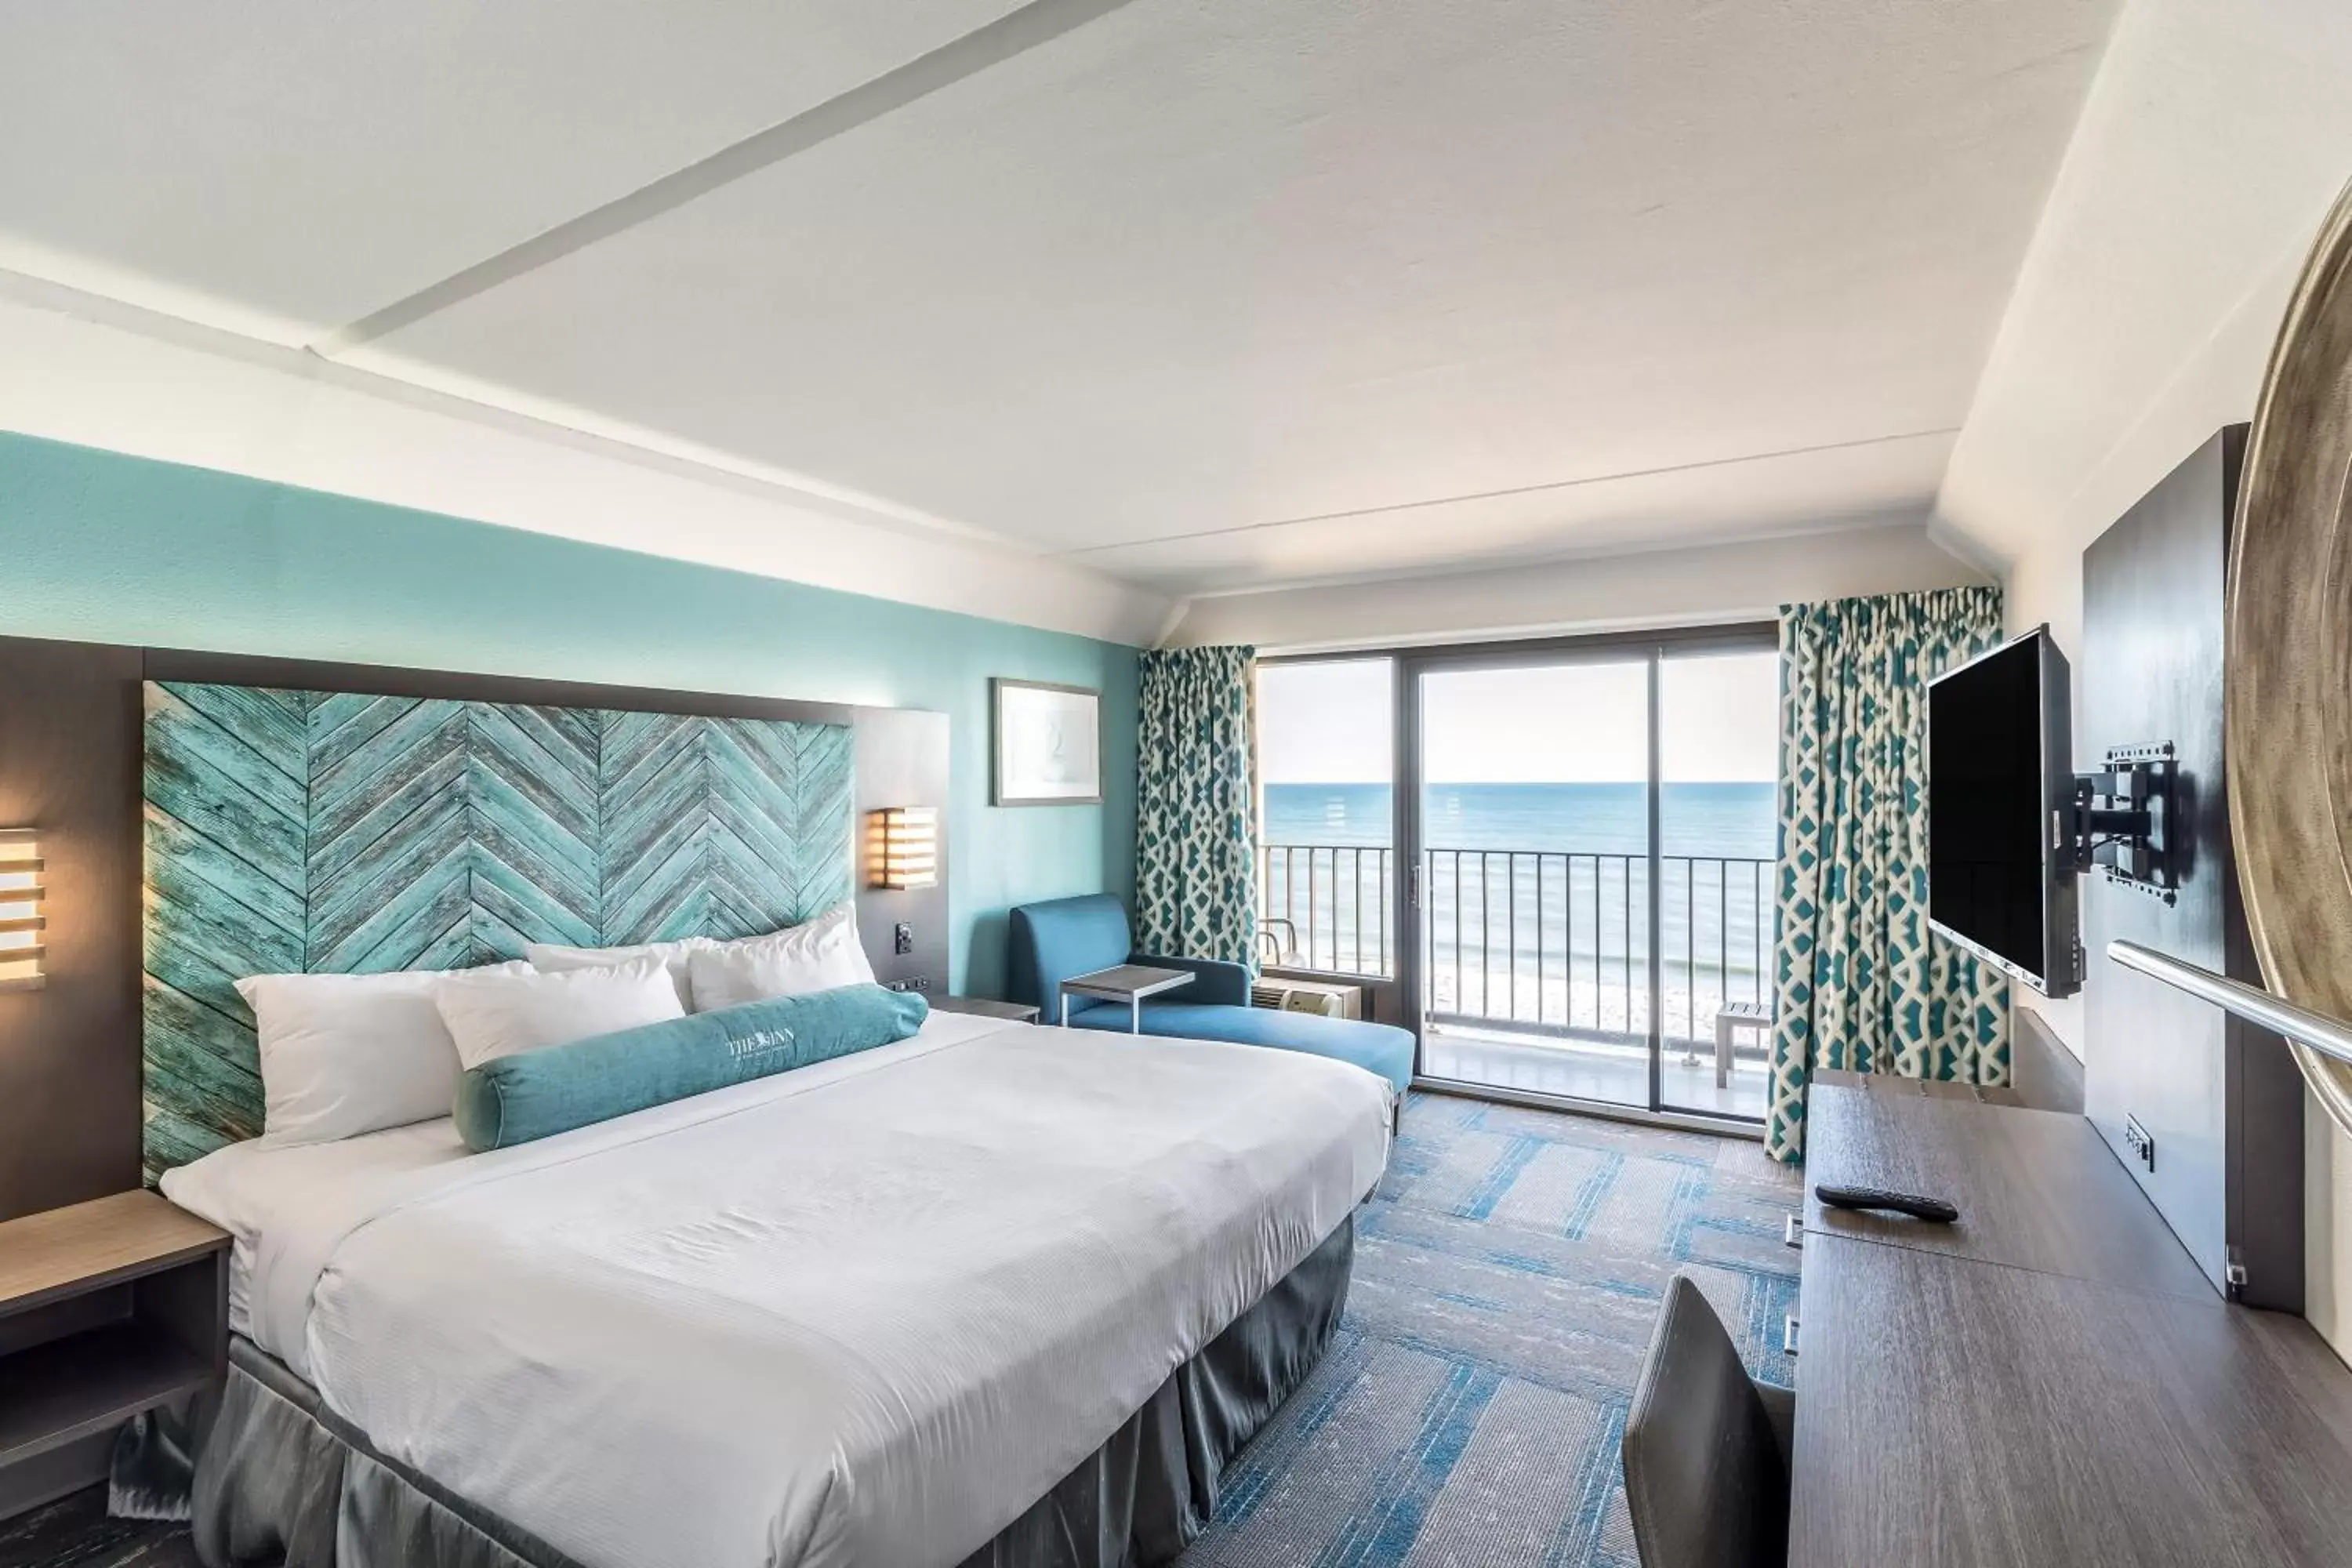 Bedroom in The Inn at Pine Knoll Shores Oceanfront